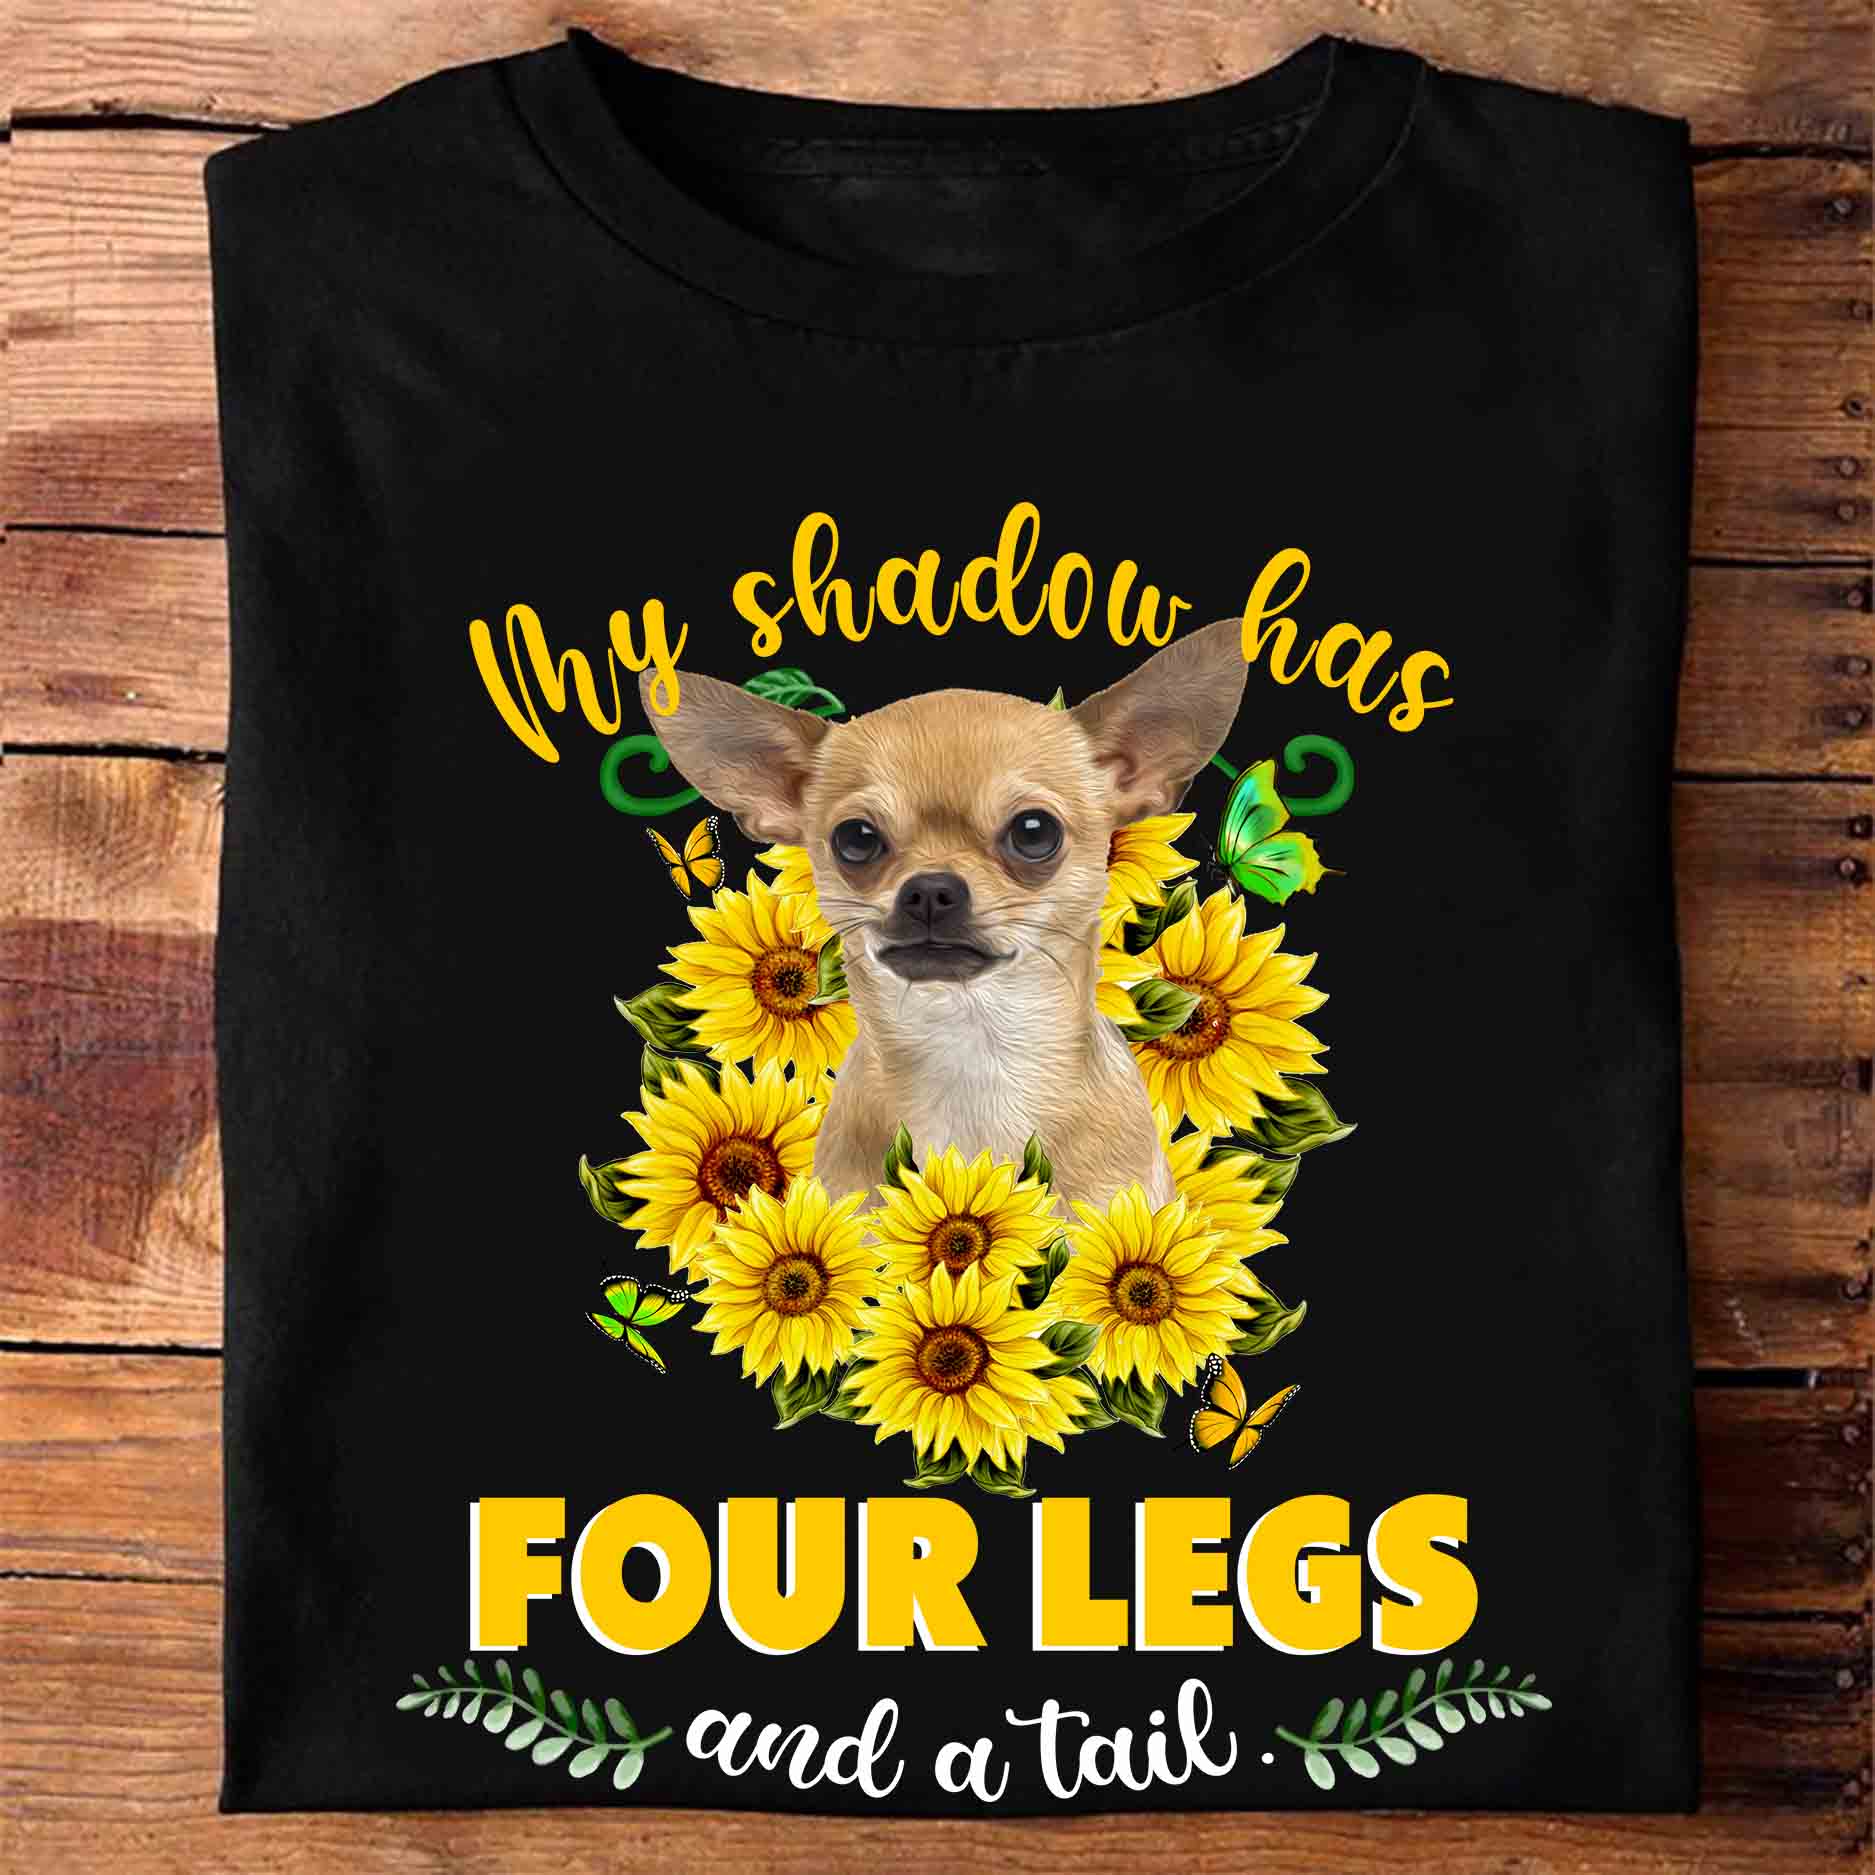 My shadow has four legs and a tail - Chihuahua dog